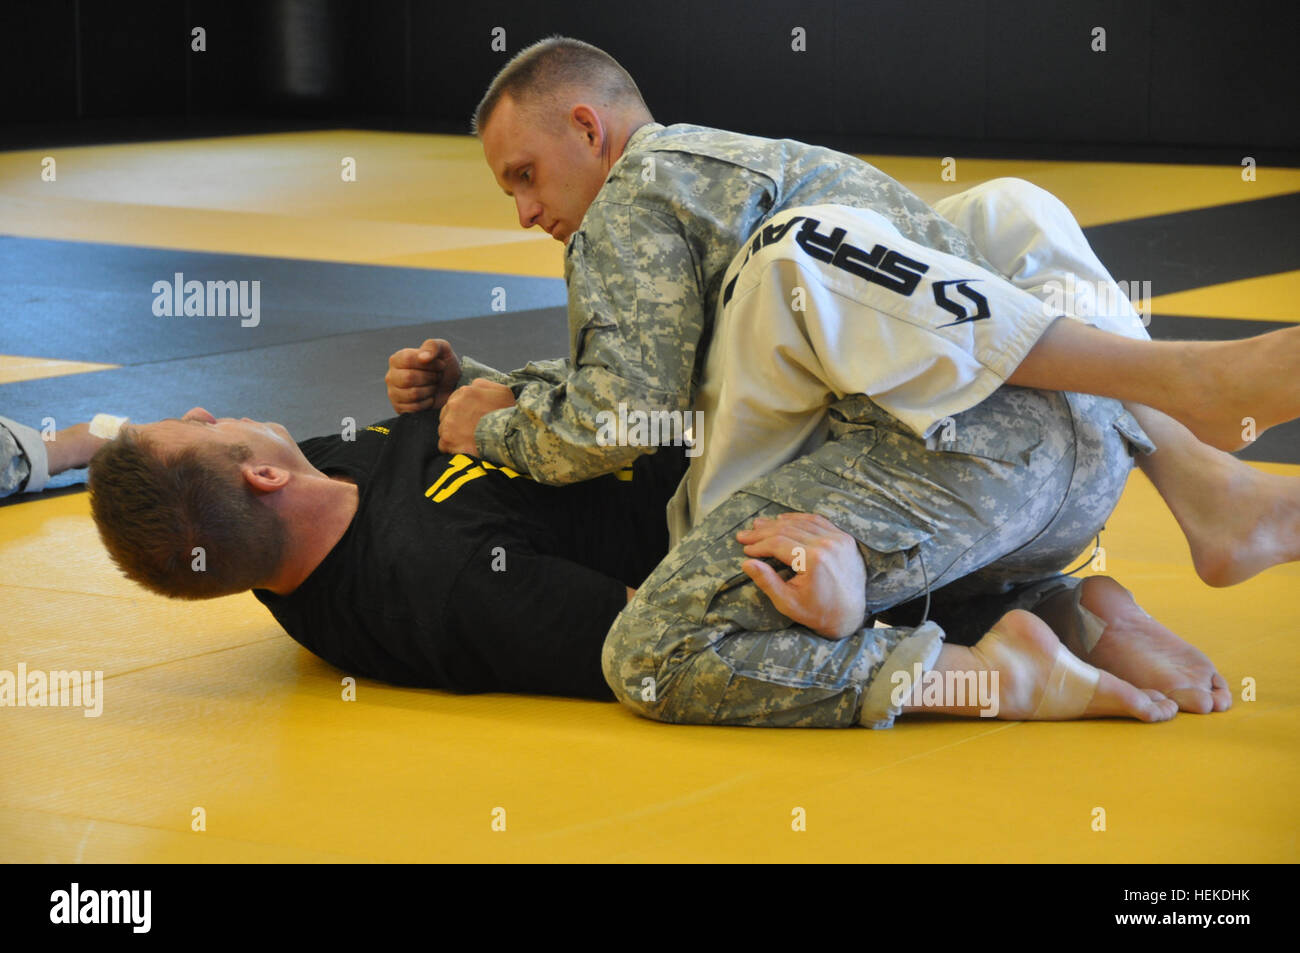 Sgt. Ryan Williams of Yucaipa, Calif., a military police officer with the 40th Military Police Company, 185th Military Police Battalion, 49th Military Police Brigade, practices combatives prior to the end of week double elimination tournament held as part of the Best Warrior Competition at Camp San Luis Obispo, Calif., Sept. 14. California National Guard soldiers compete in the 2011 Best Warrior Competition 110914-A-DH635-011 Stock Photo